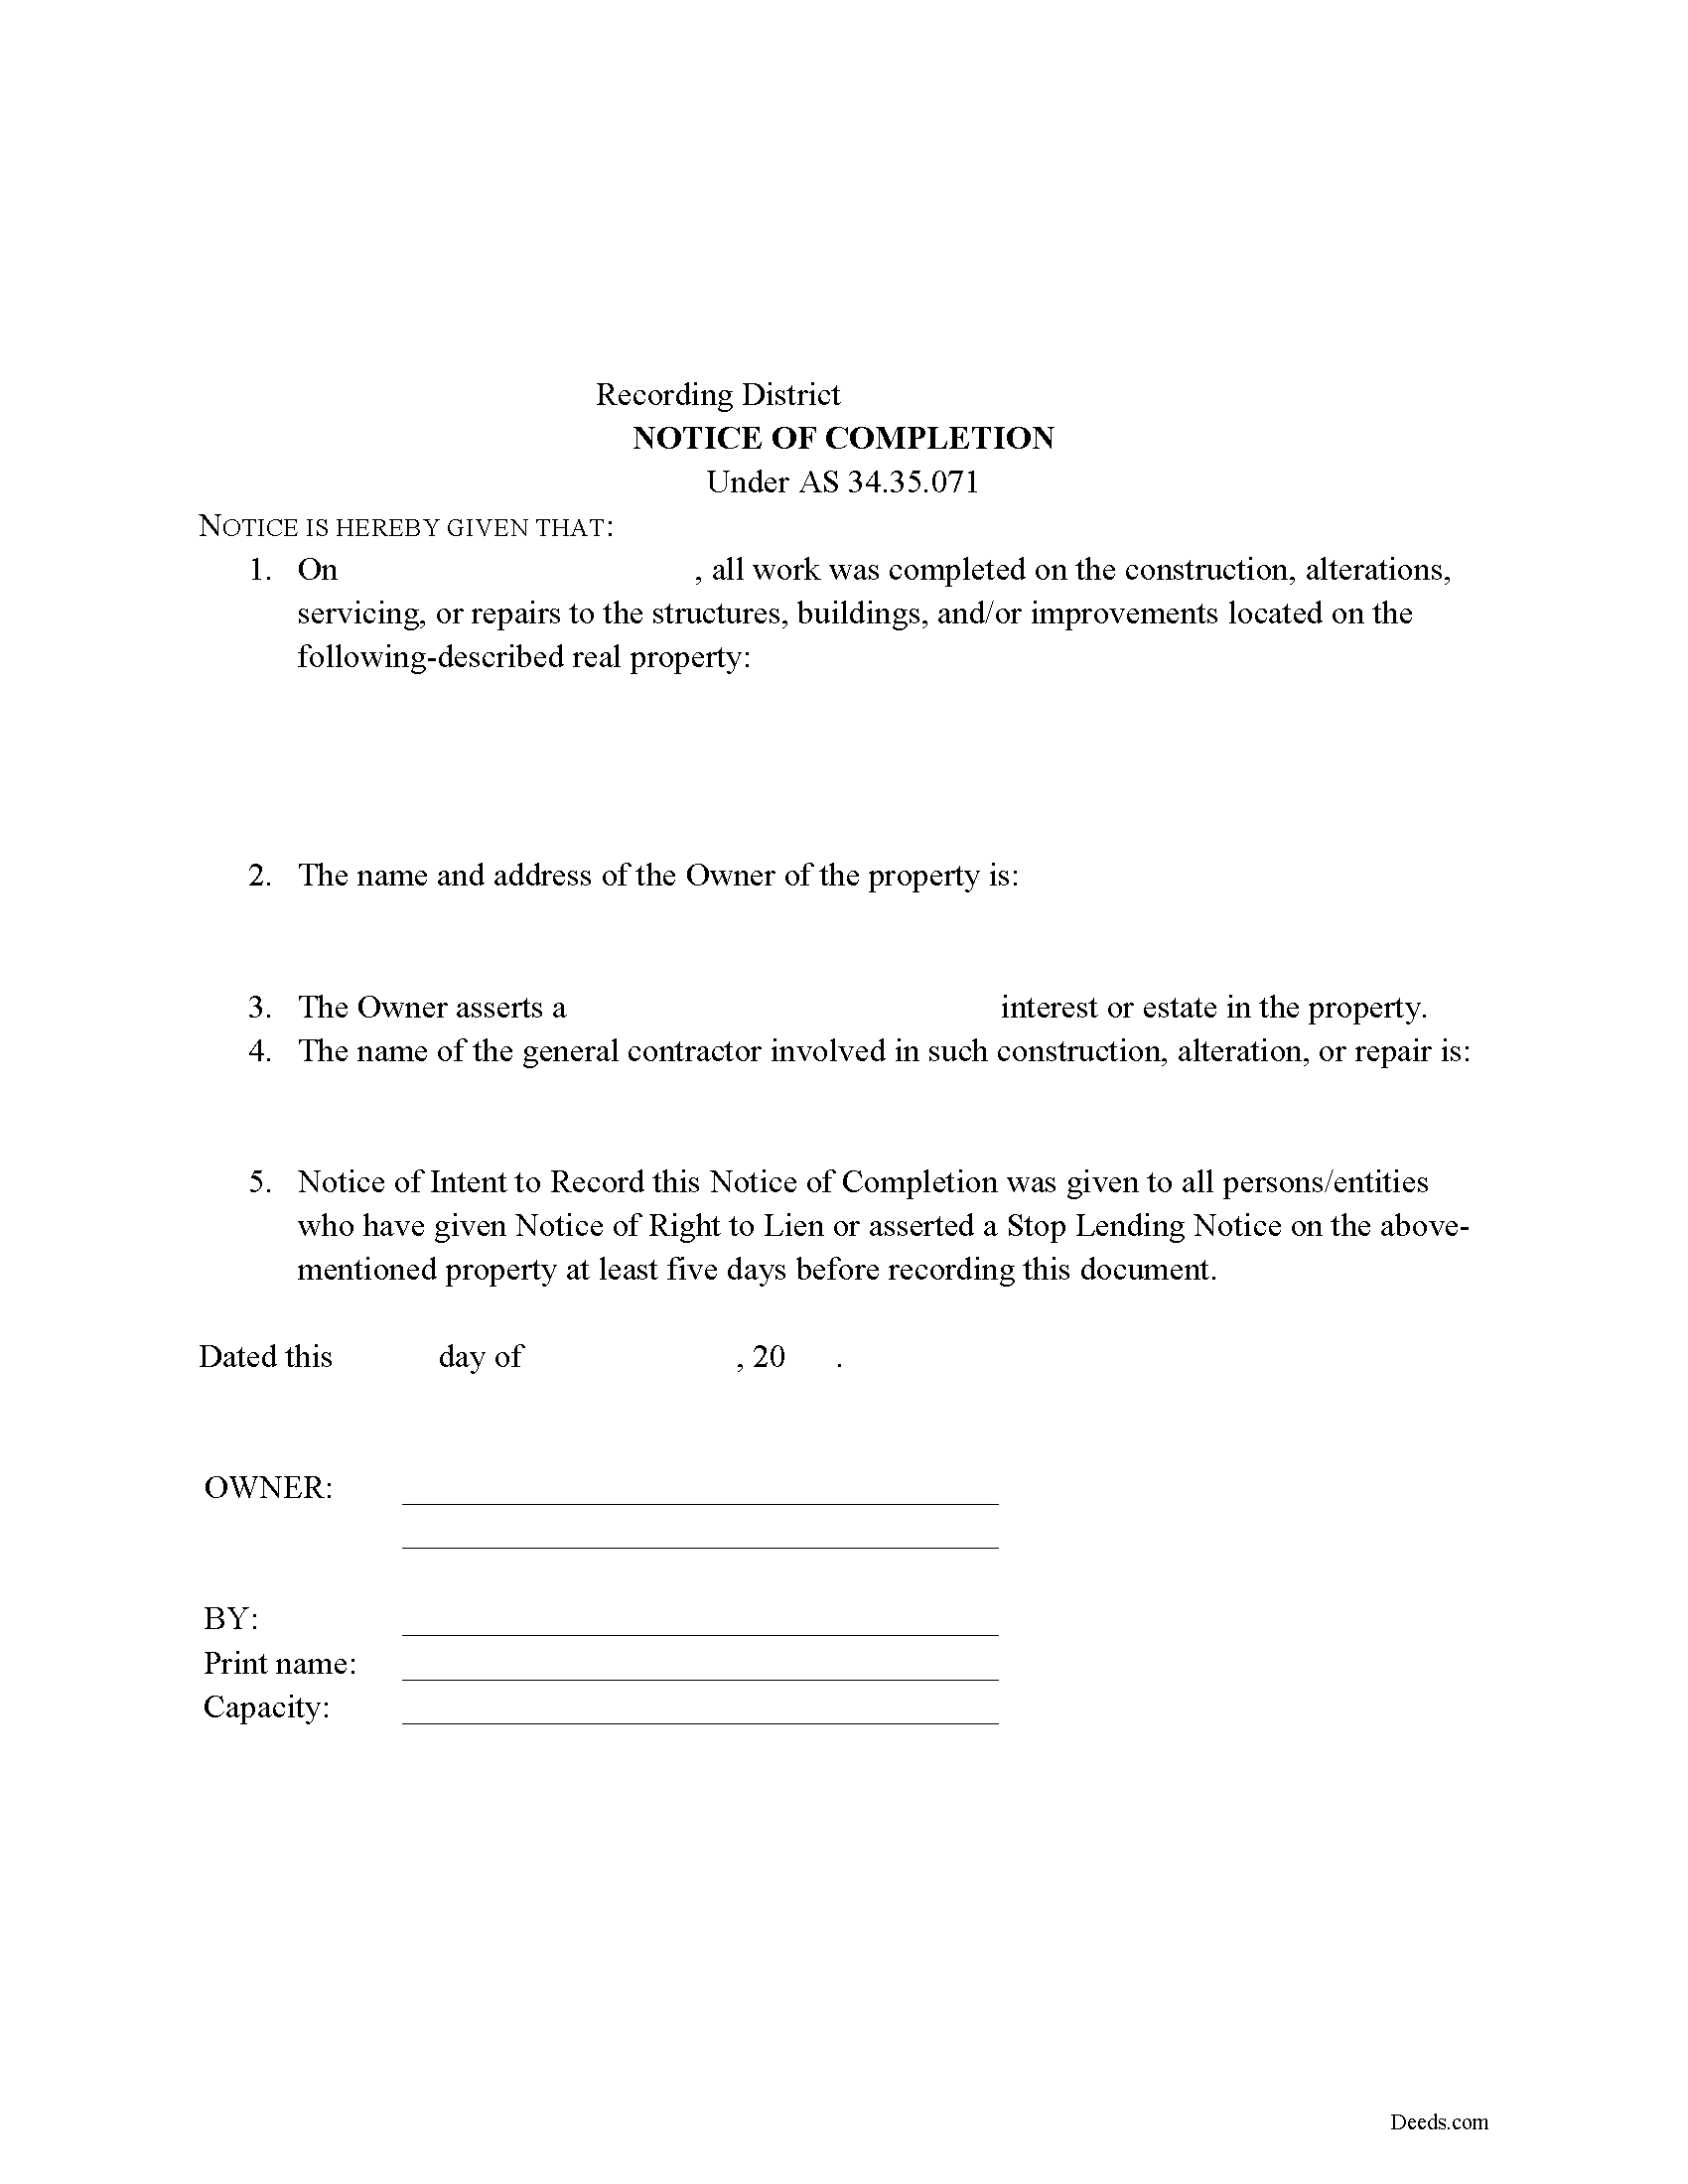 Notice of Completion Form